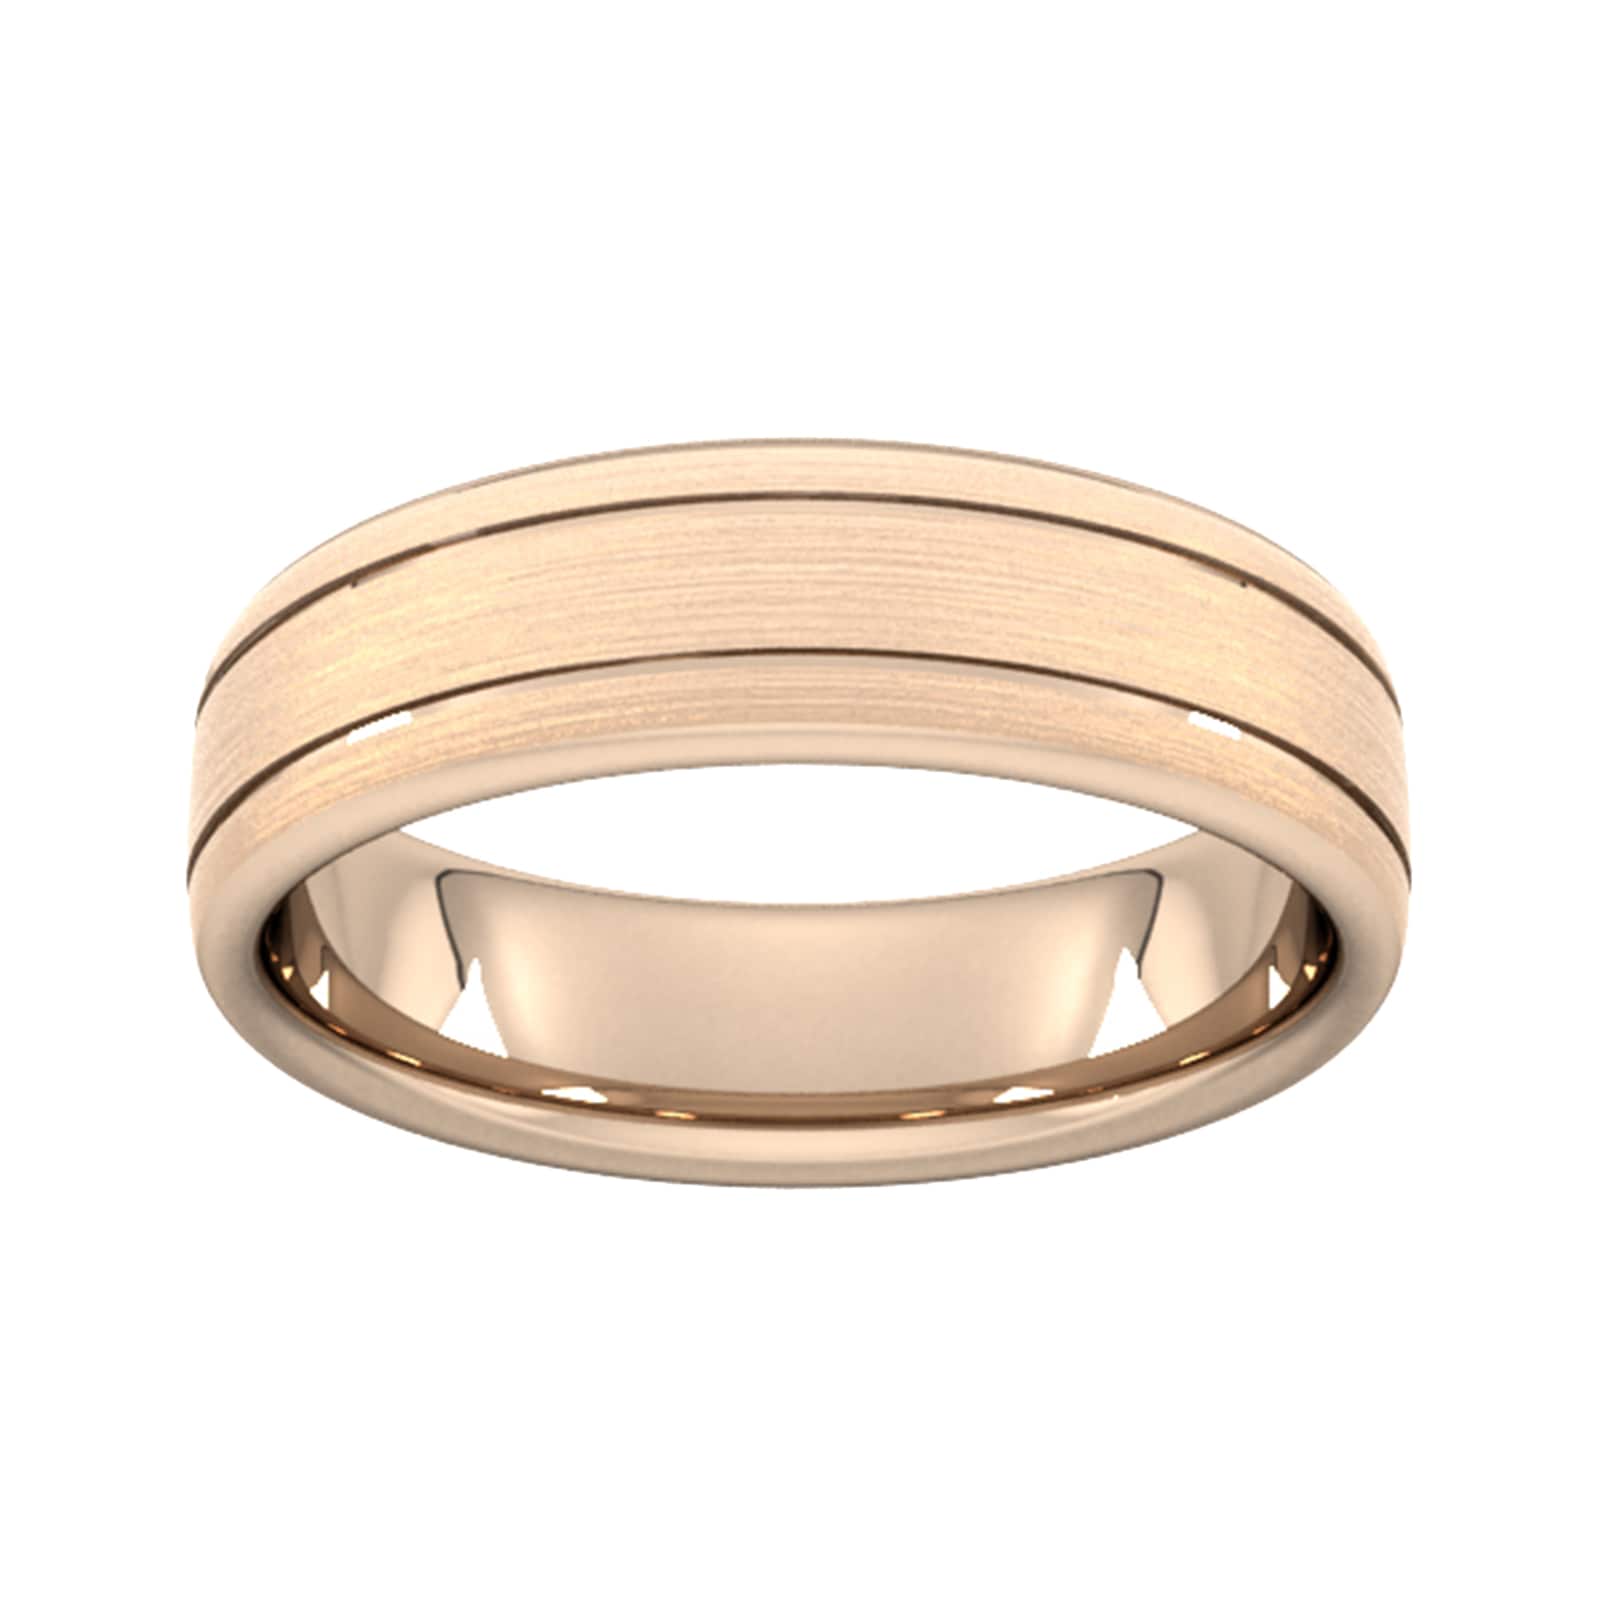 6mm Flat Court Heavy Matt Finish With Double Grooves Wedding Ring In 18 Carat Rose Gold - Ring Size H